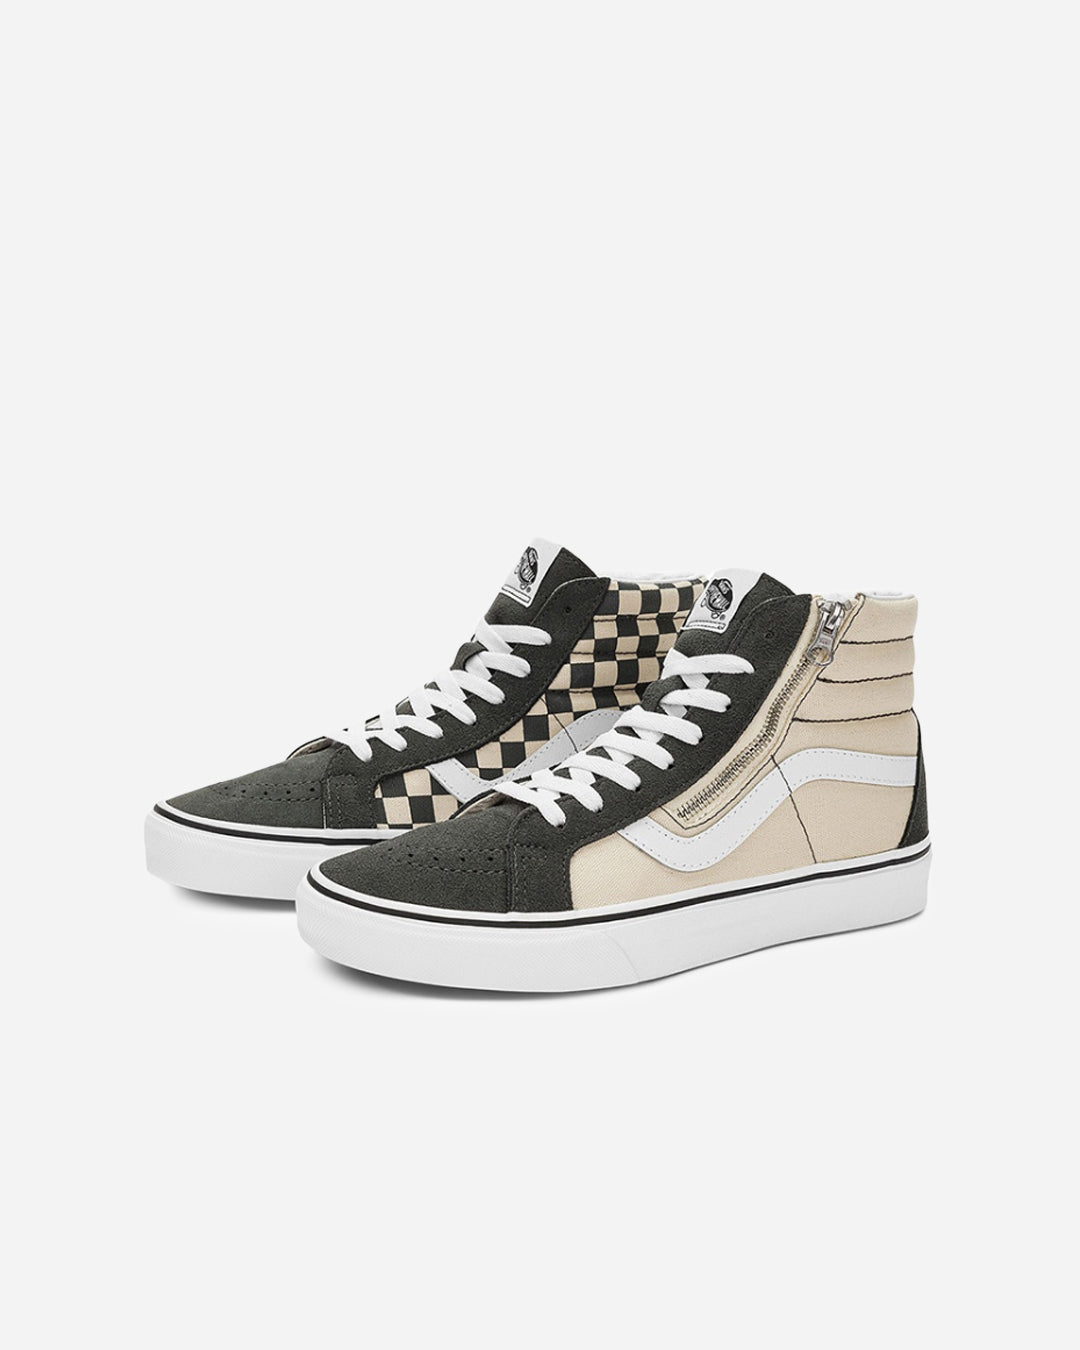 SK8-HI RE-ISSUE SIDE ZIP TAN/WH